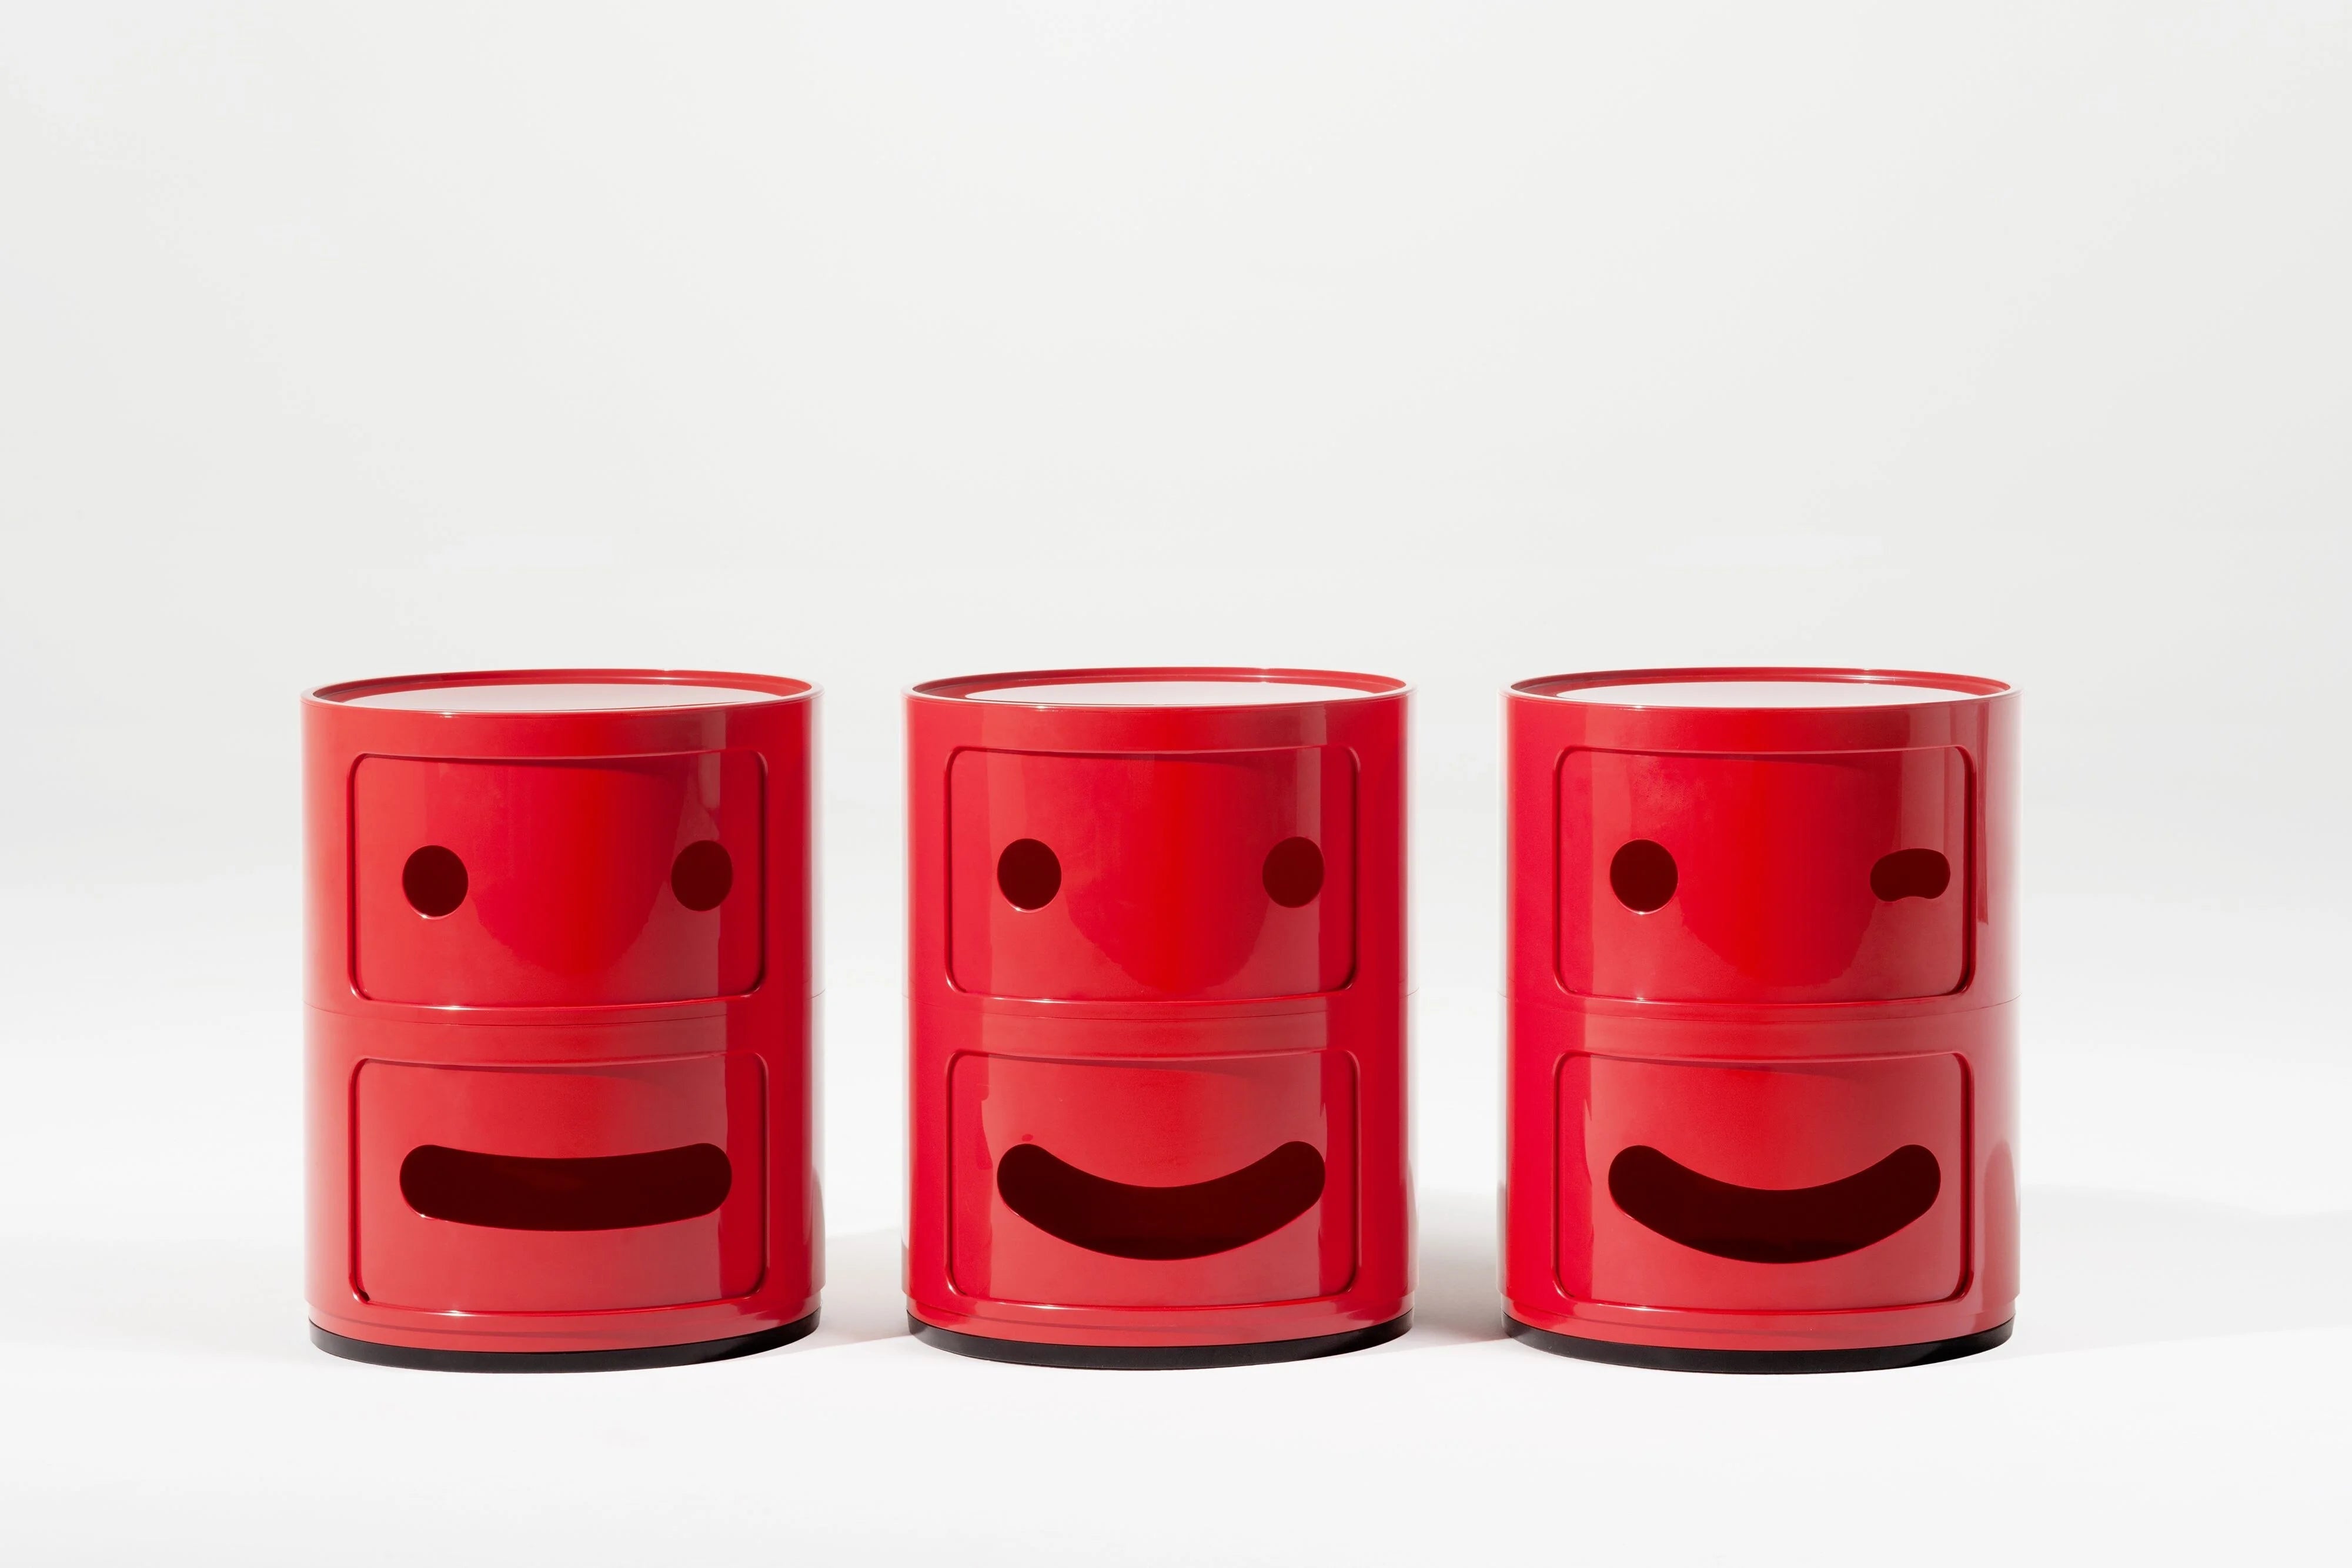 Kartell Componibili Smile Container 2 Niveau, 1